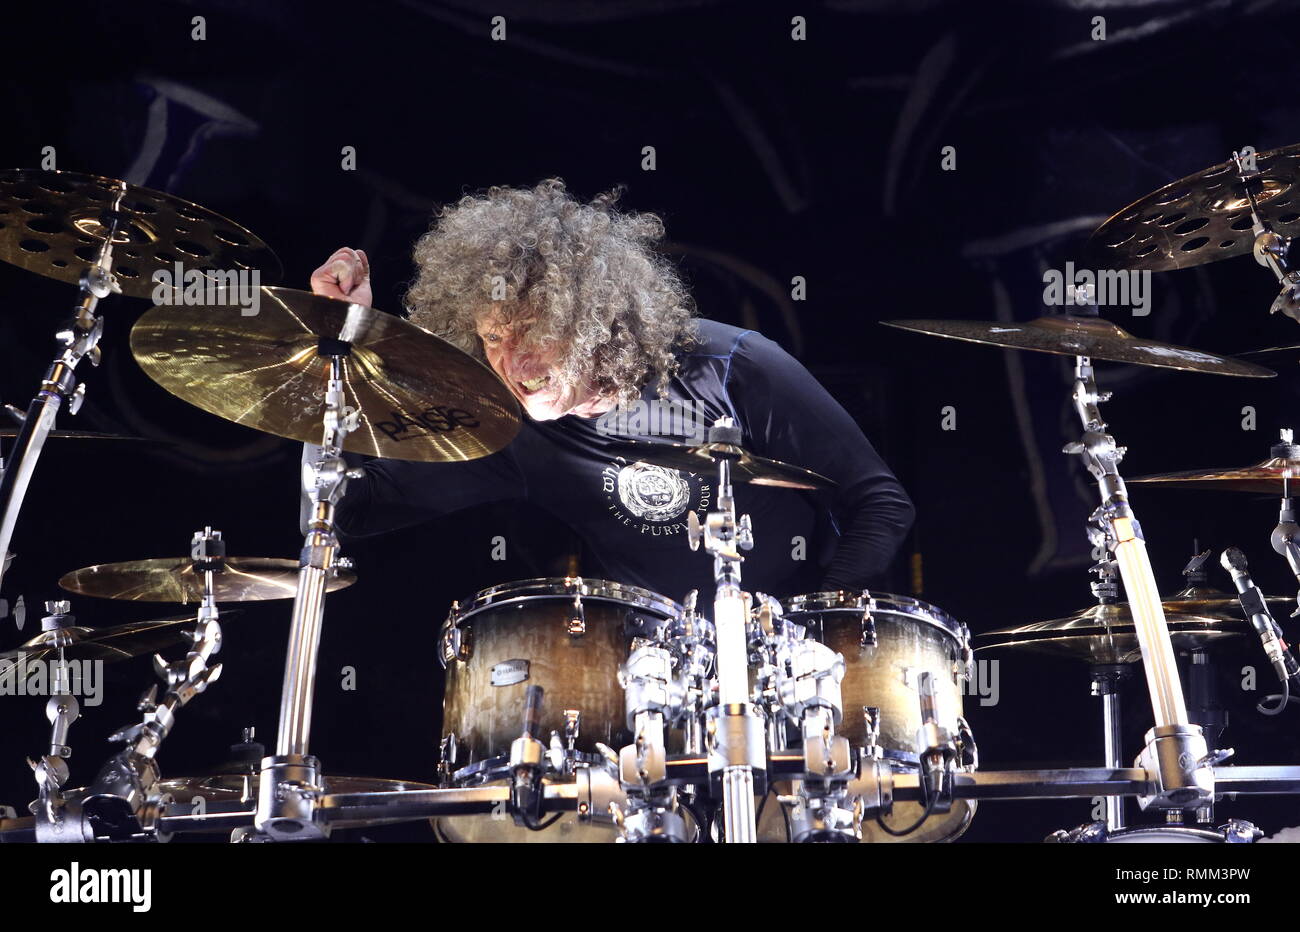 Drummer Tommy Aldridge is shown performing on stage during a 'live' concert appearance with Whitesnake. Stock Photo